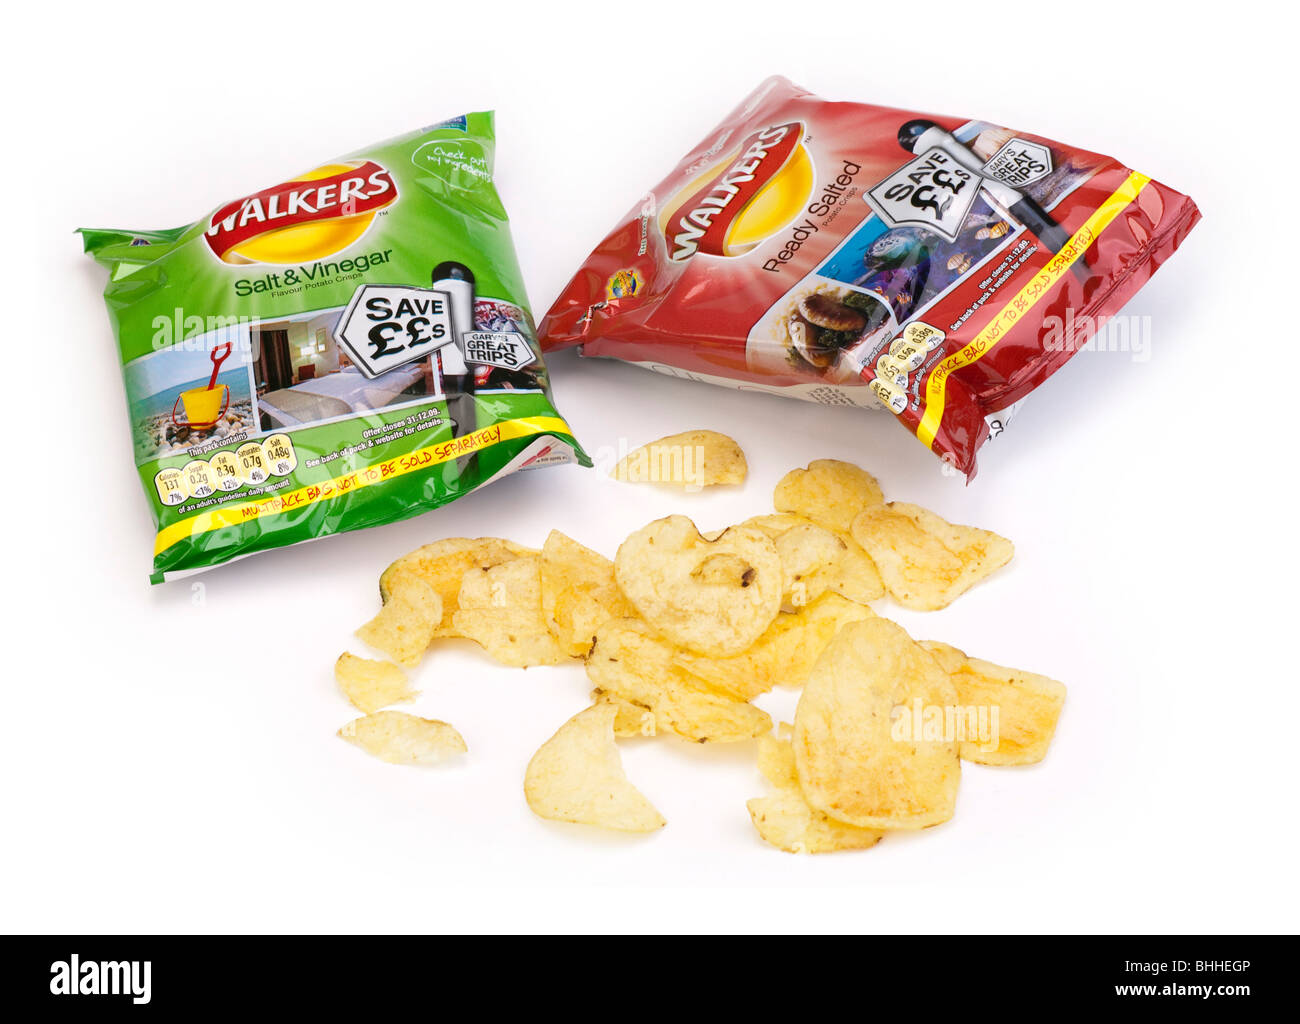 packet of Walkers Crisps Stock Photo